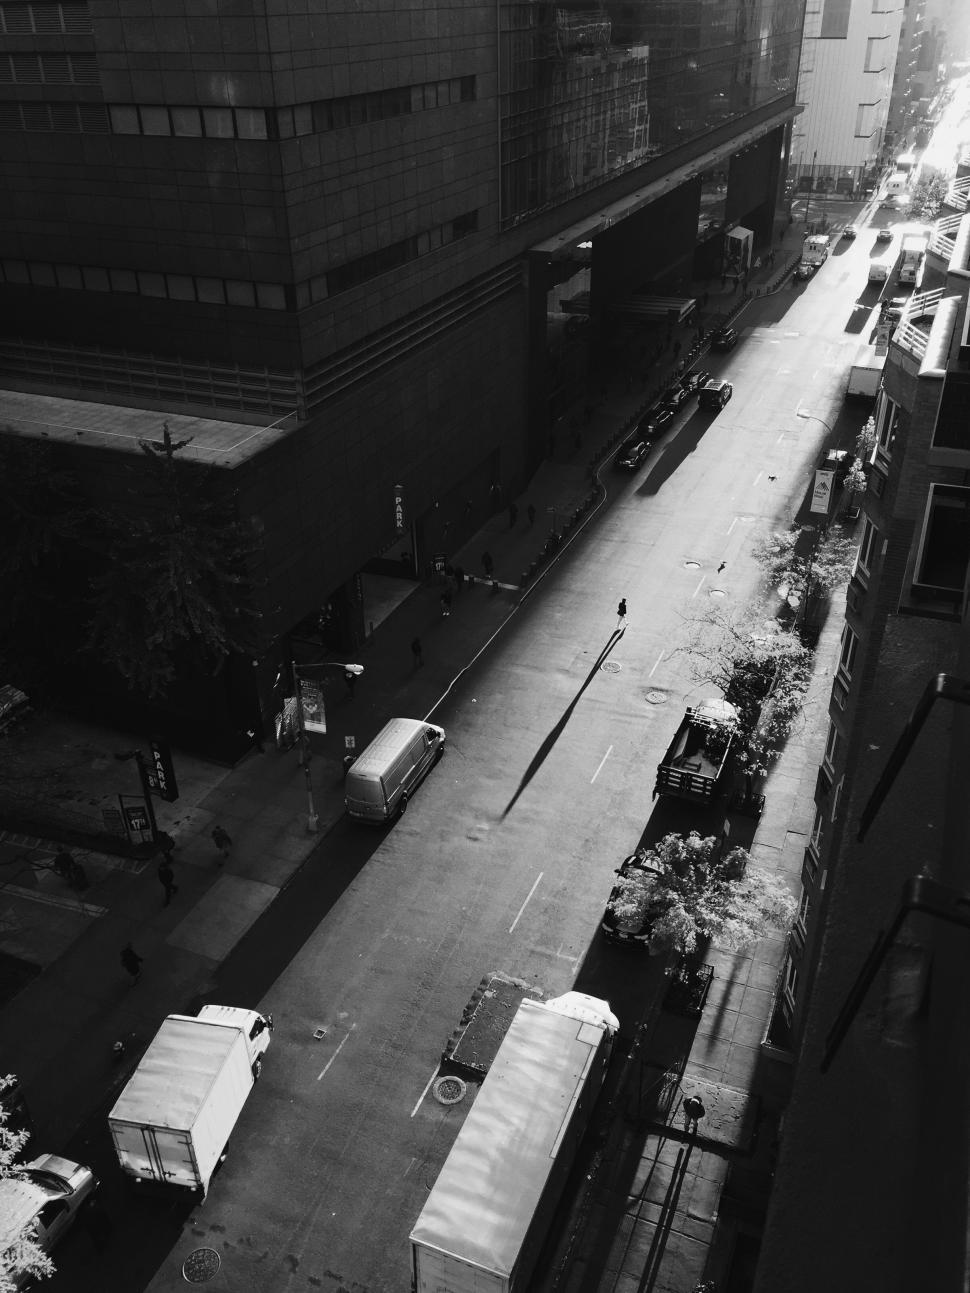 Free Image of Busy City Street in Black and White 